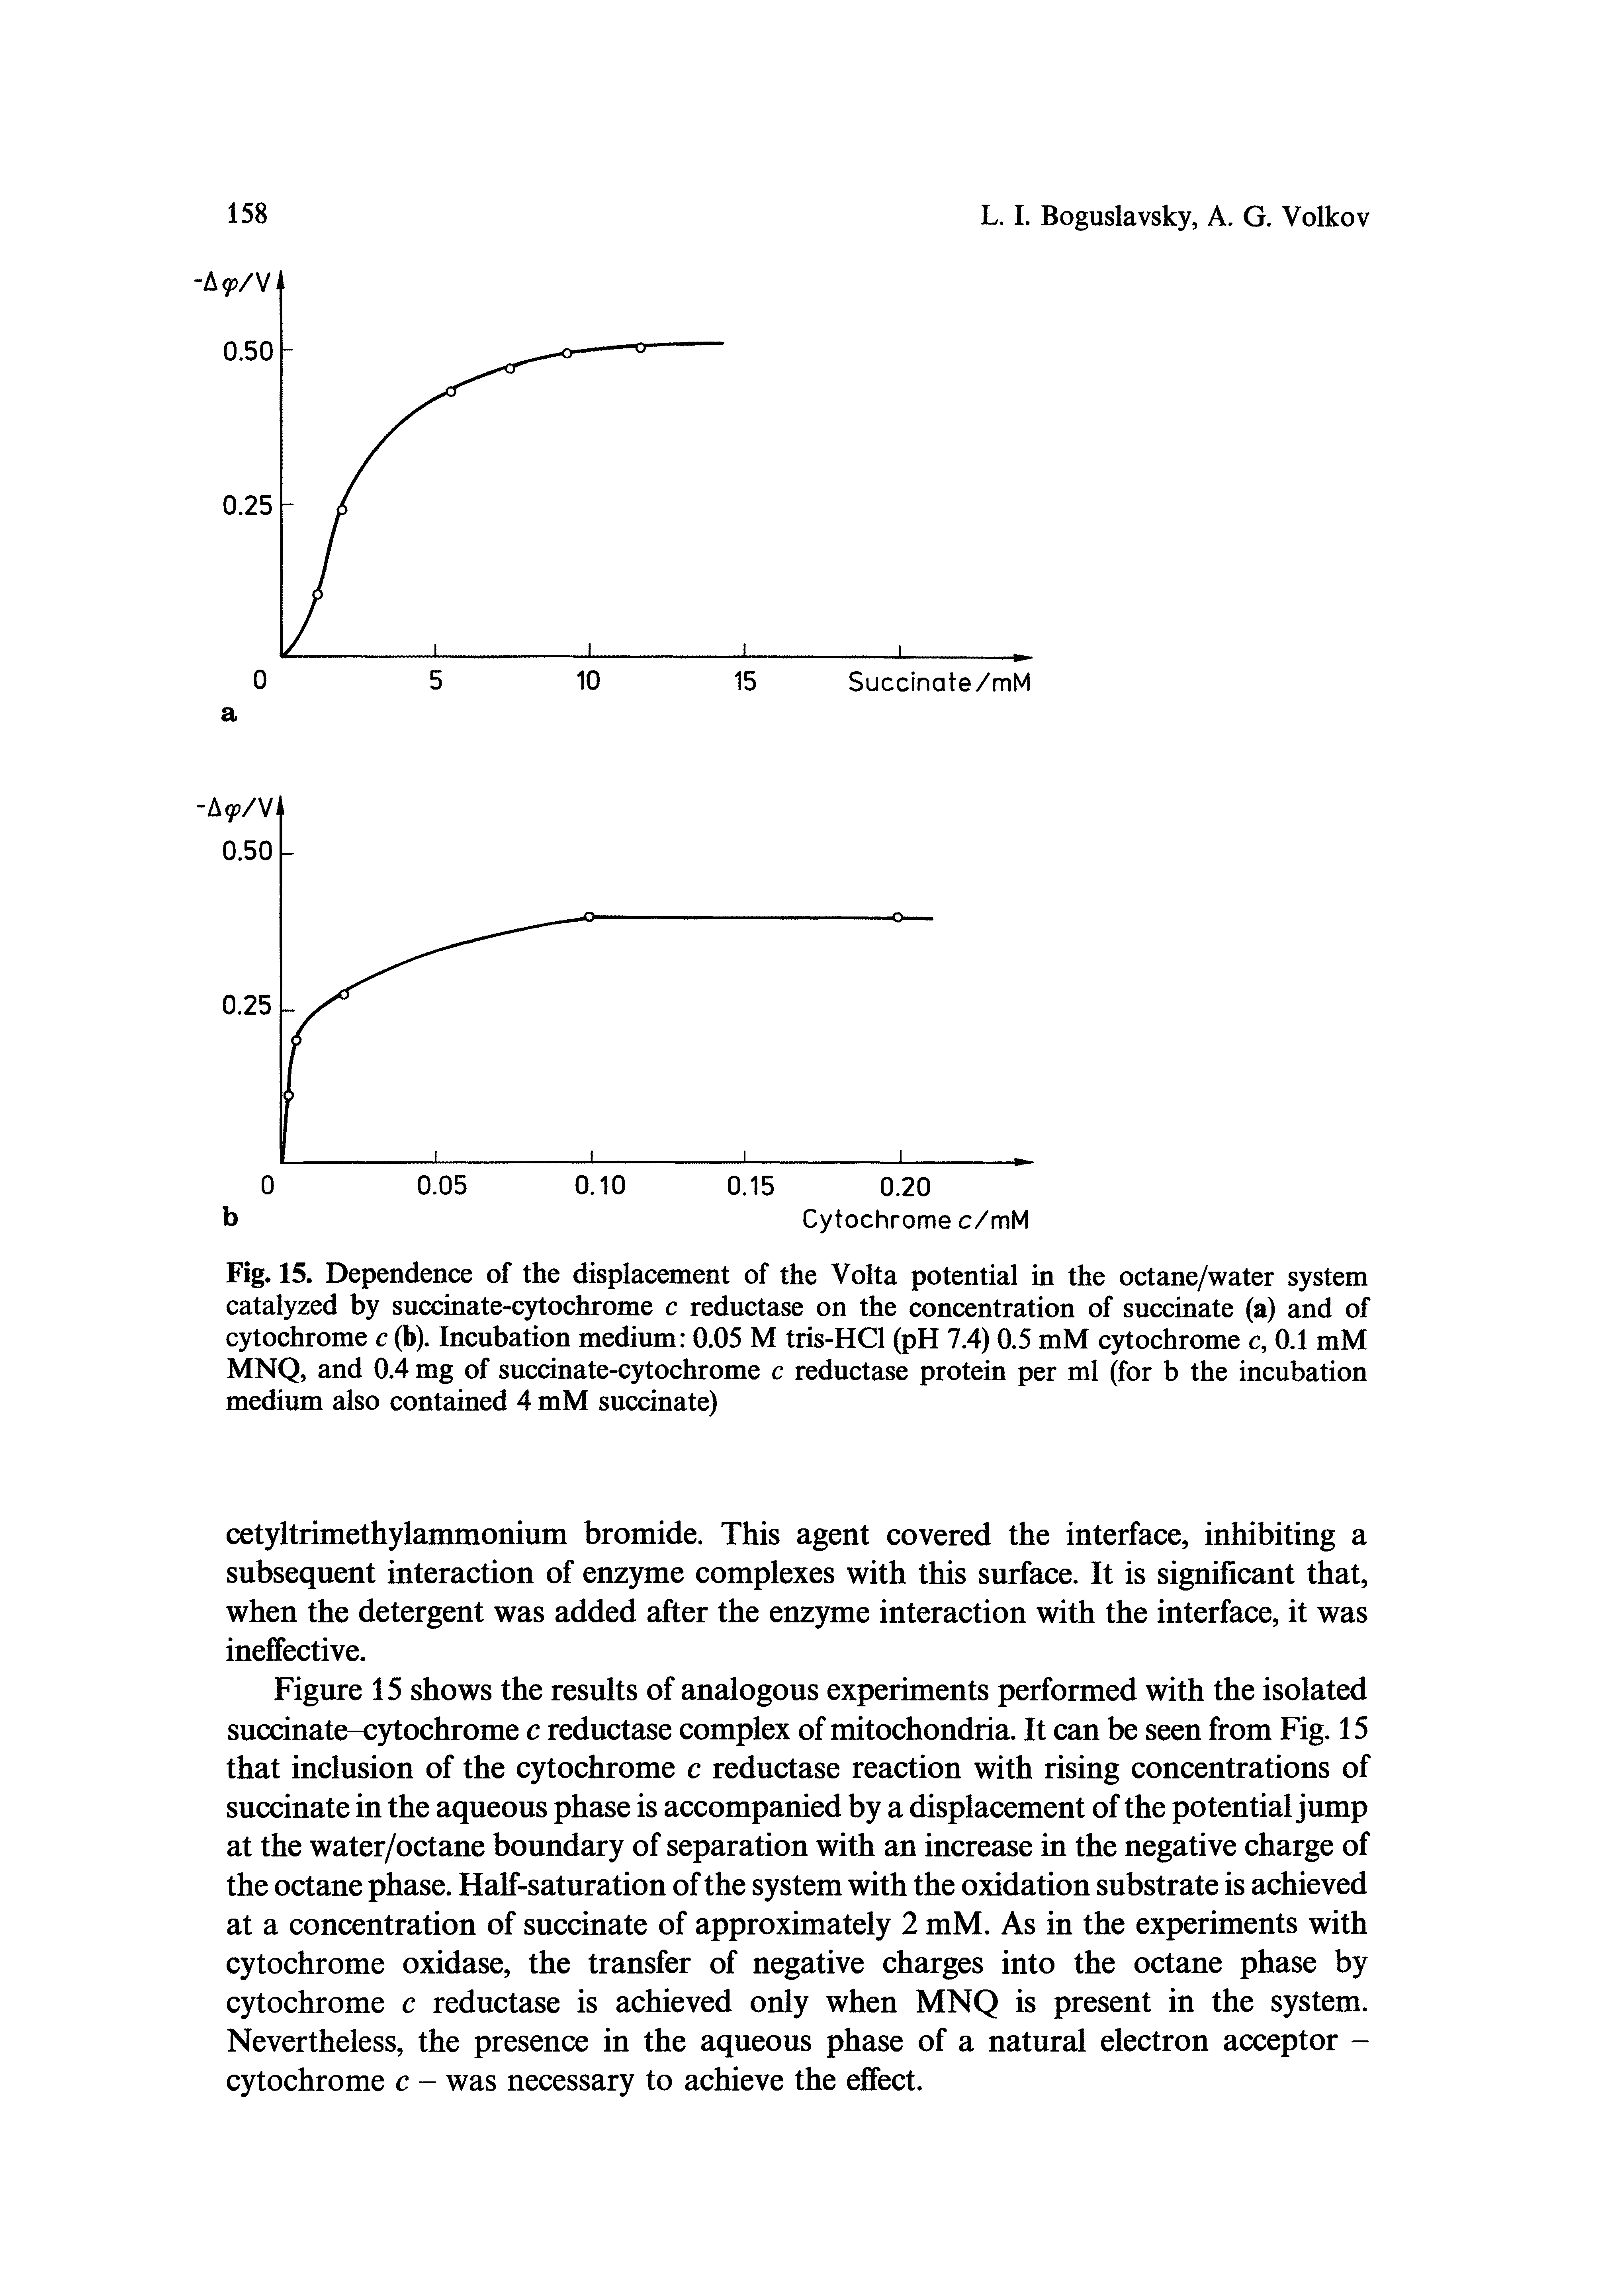 Fig. 15. Dependence of the displacement of the Volta potential in the octane/water system catalyzed by succinate-cytochrome c reductase on the concentration of succinate (a) and of cytochrome c (b). Incubation medium 0.05 M tris-HCl (pH 7.4) 0.5 mM cytochrome c, 0.1 mM MNQ, and 0.4 mg of sucdnate-cytochrome c reductase protein per ml (for b the incubation medium also contained 4 mM succinate)...